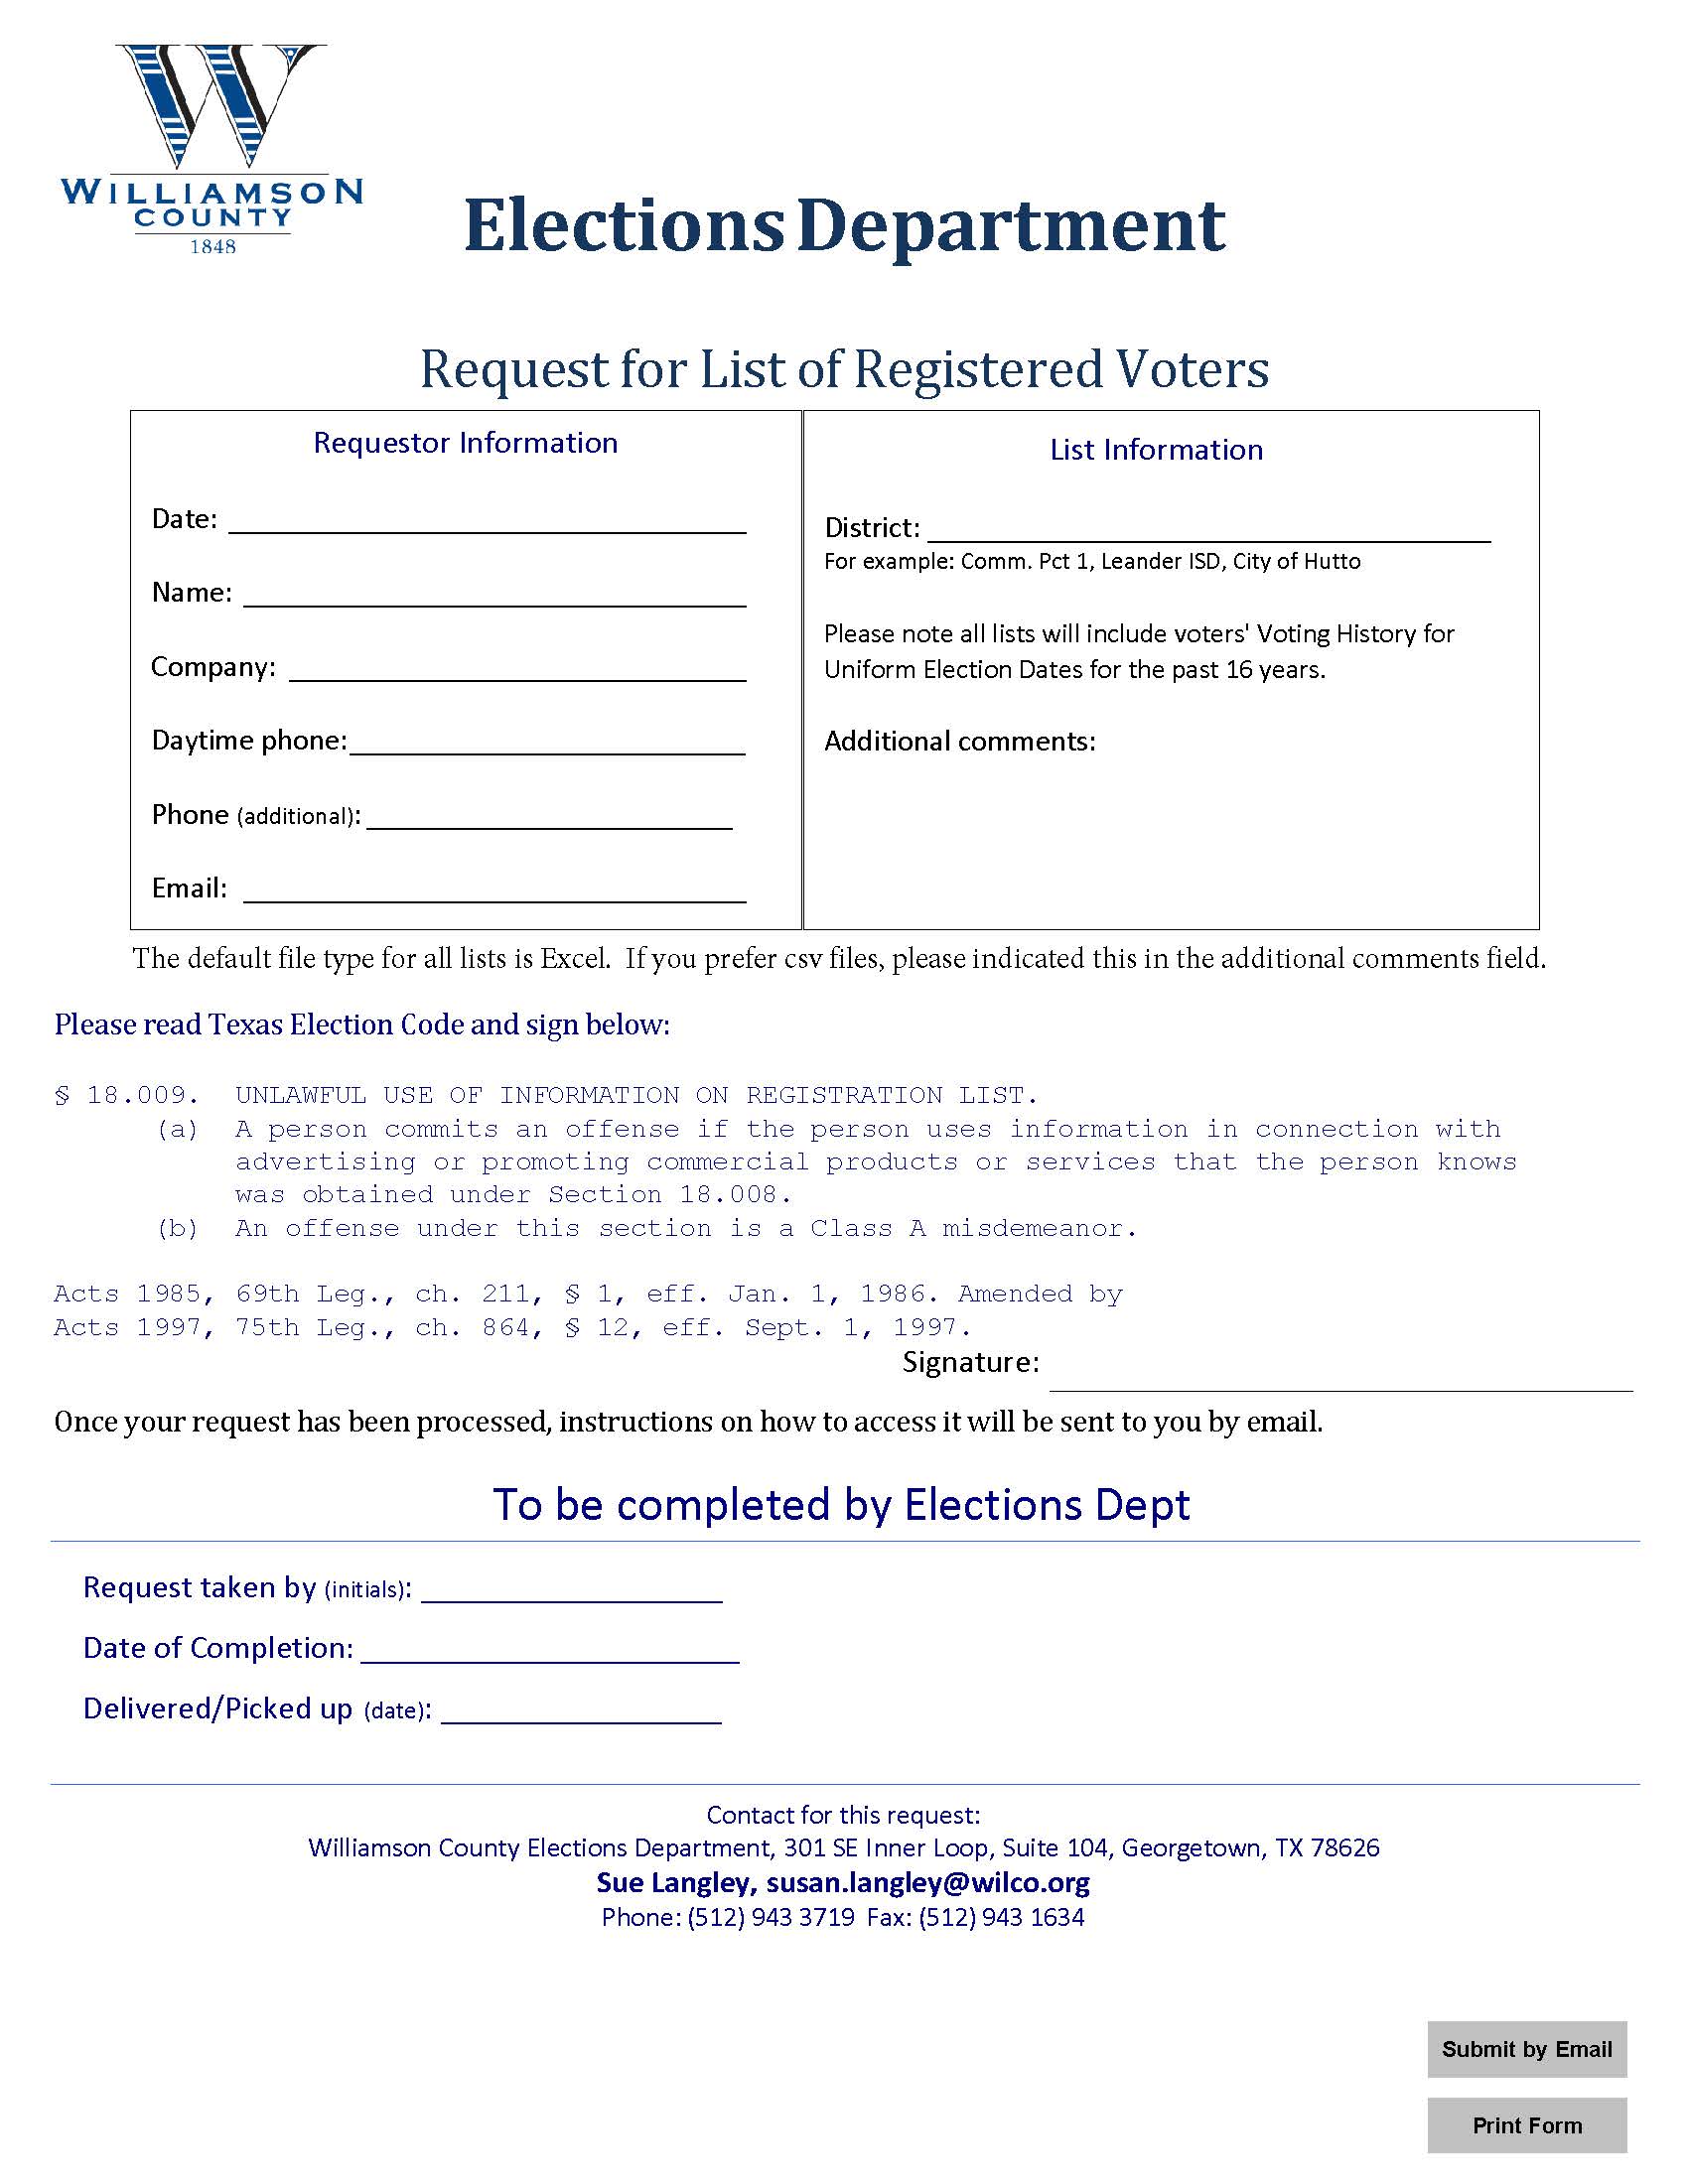 Image of the Request for List of Registered Voters form